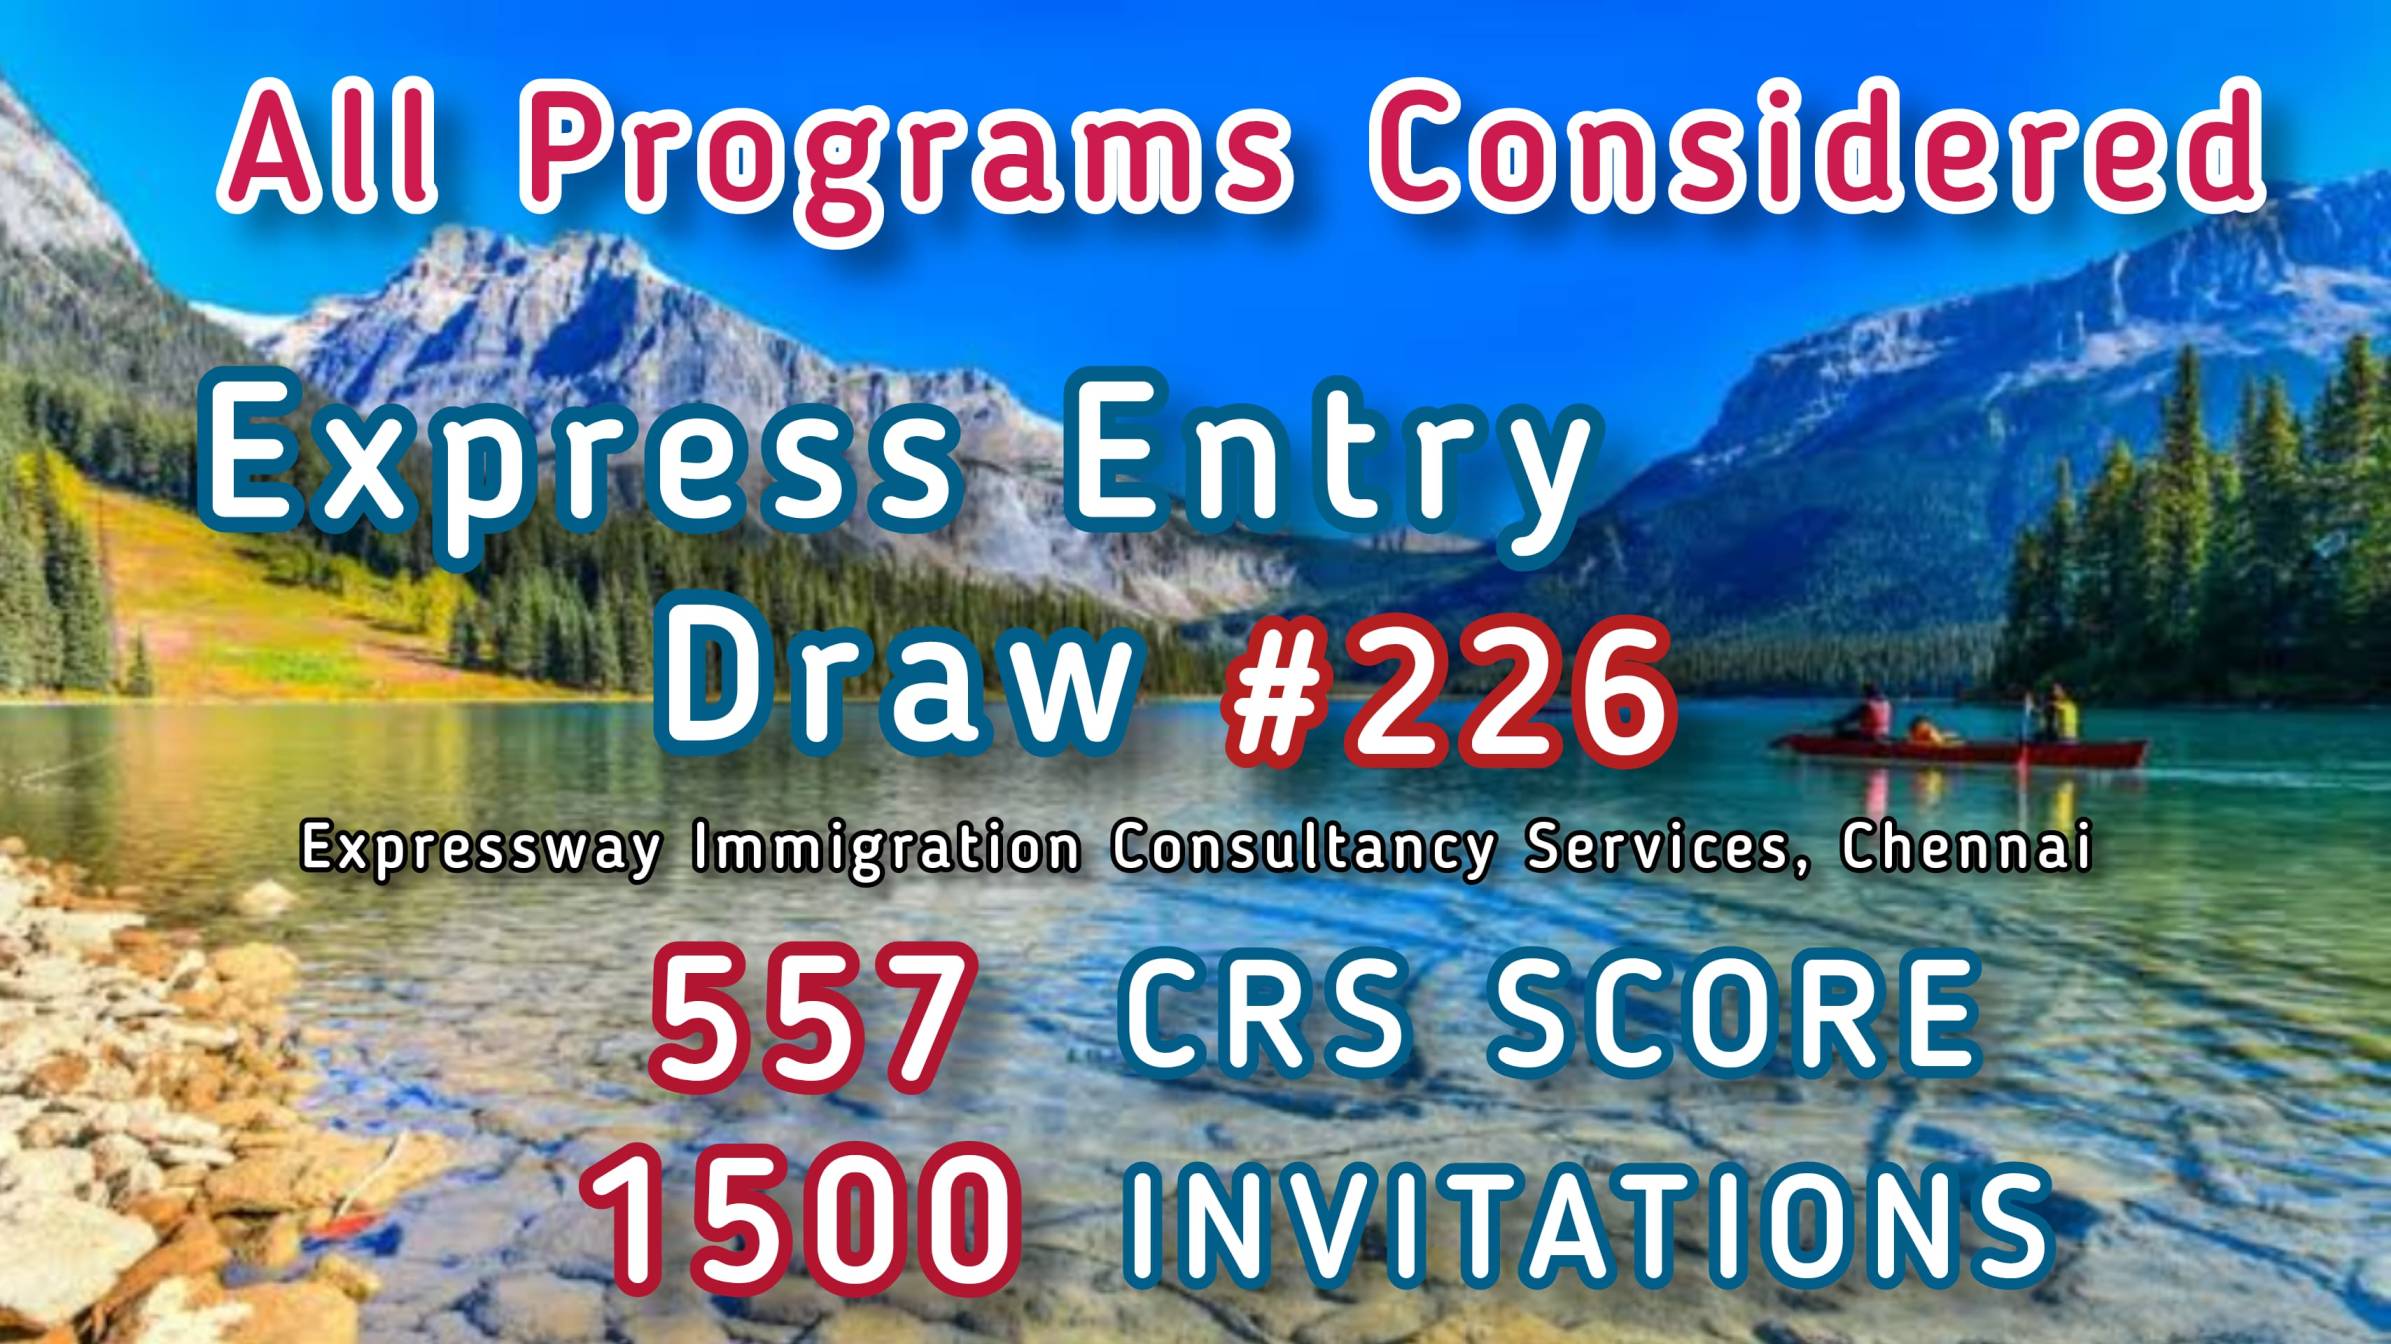 Latest allprogram Express Entry draw 226 July 6, 2022 Expressway